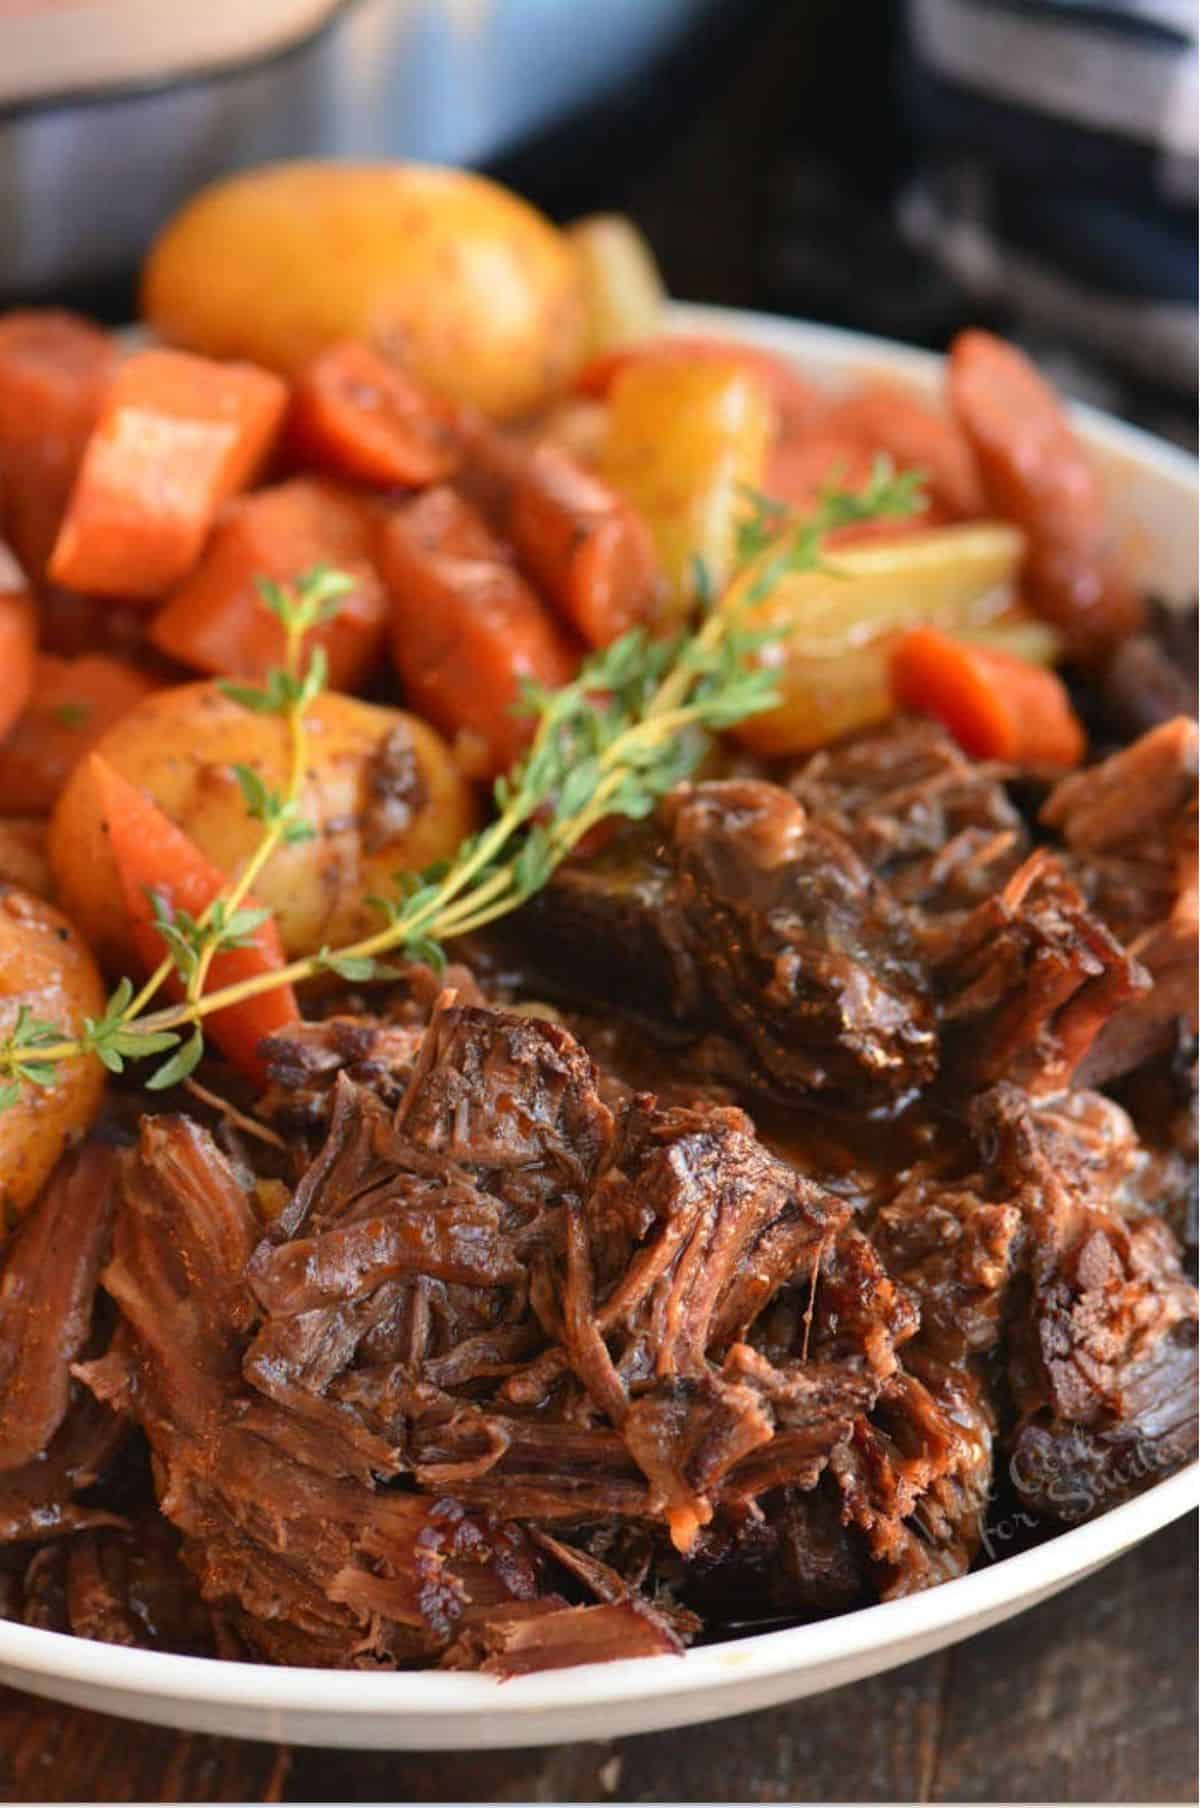 Pot roast with carrots and potatoes and a sprig of rosemary as garnish in a bowl.